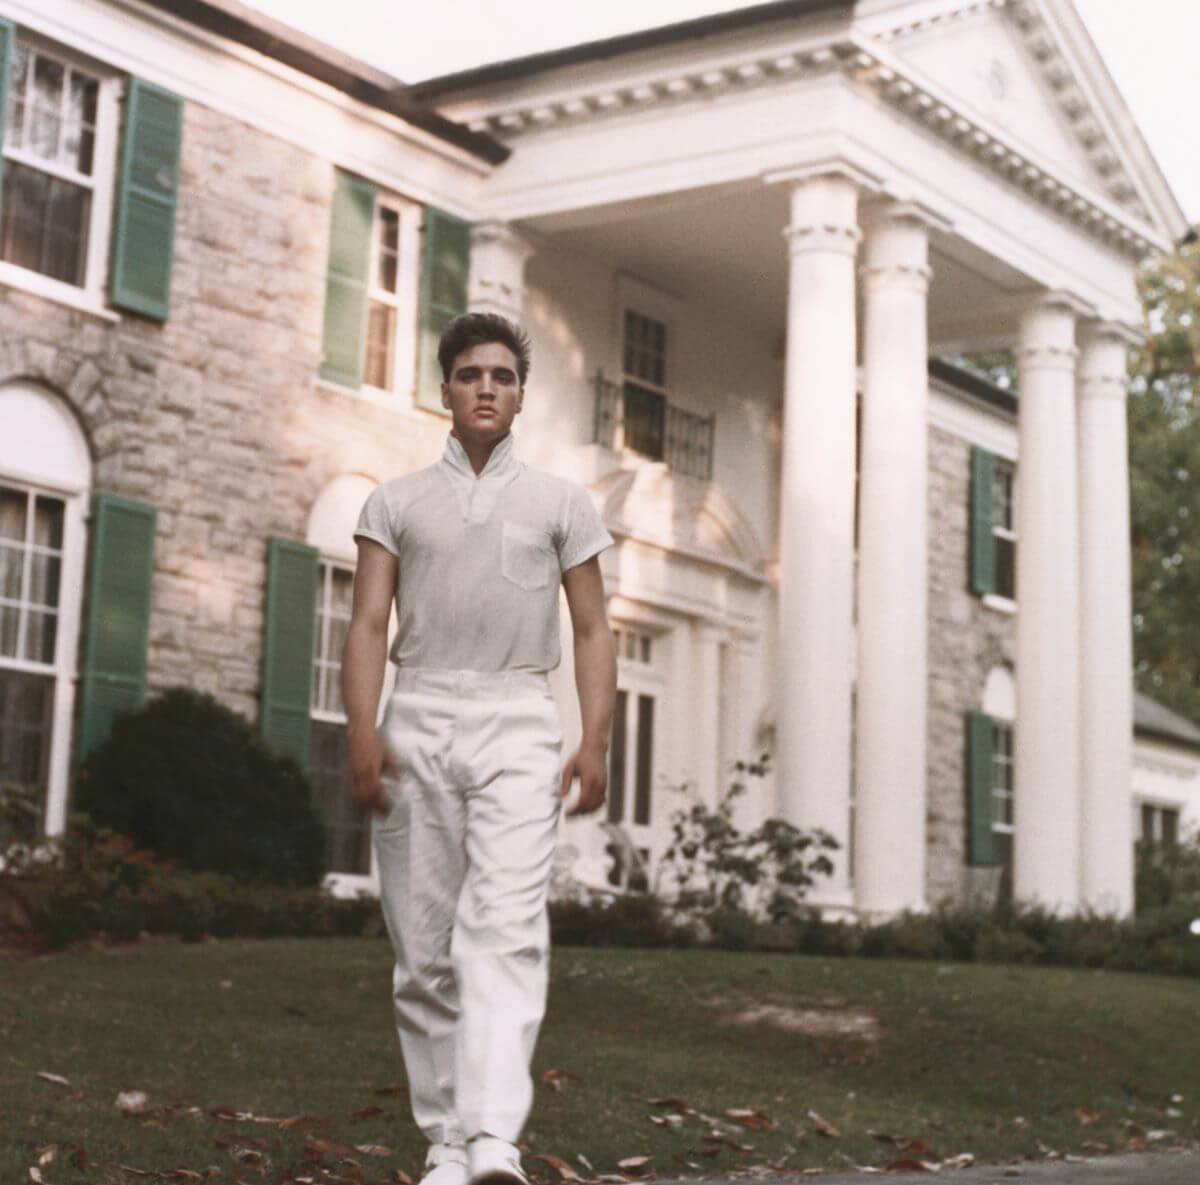 Elvis Presley wears a white shirt and pants and walks in front of Graceland.